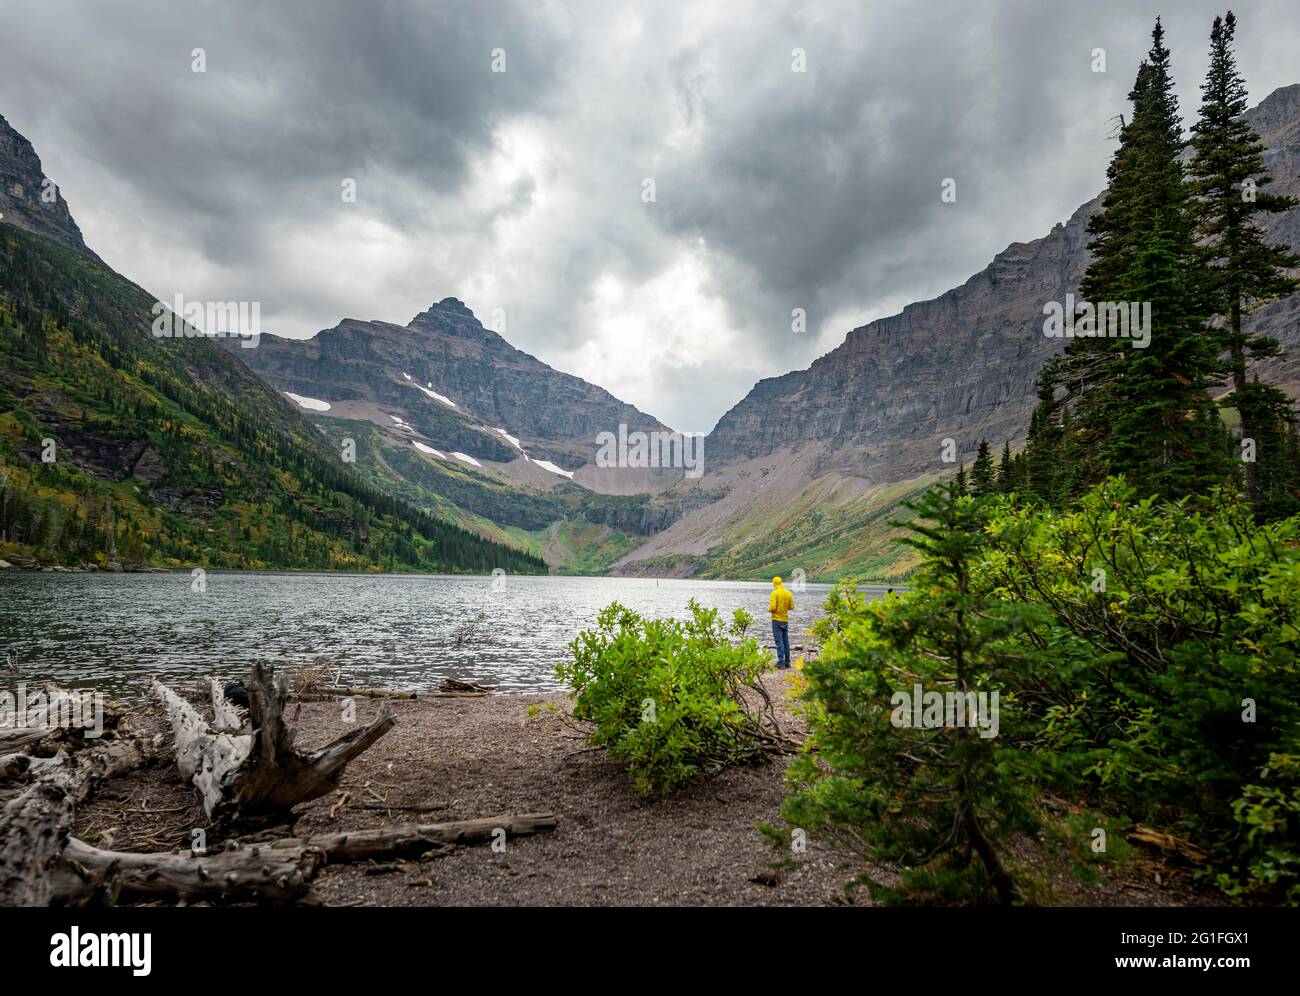 Hikers at Upper Two Medicine Lake, mountain peak Lone Walker Mountain in the back, dramatic clouds, Glacier National Park, Montana, USA Stock Photo